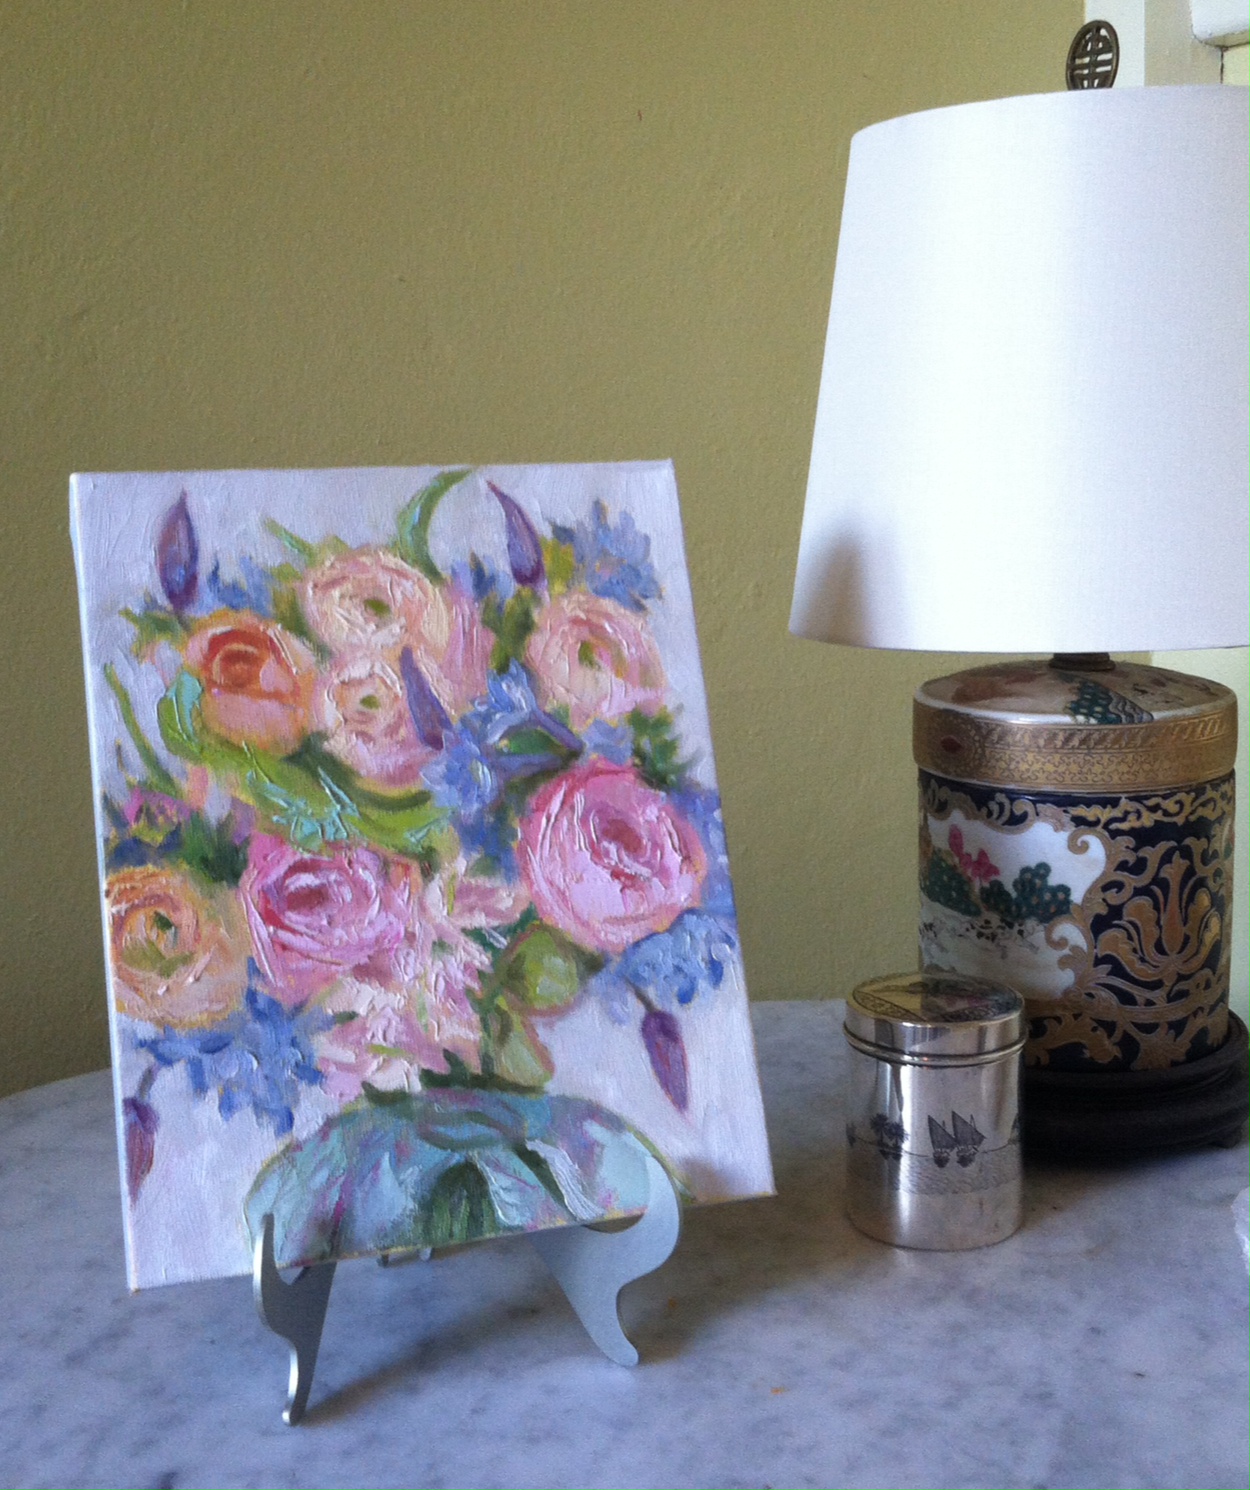 A Bridal Bouquet Portrait displayed on the easel included with the painting.